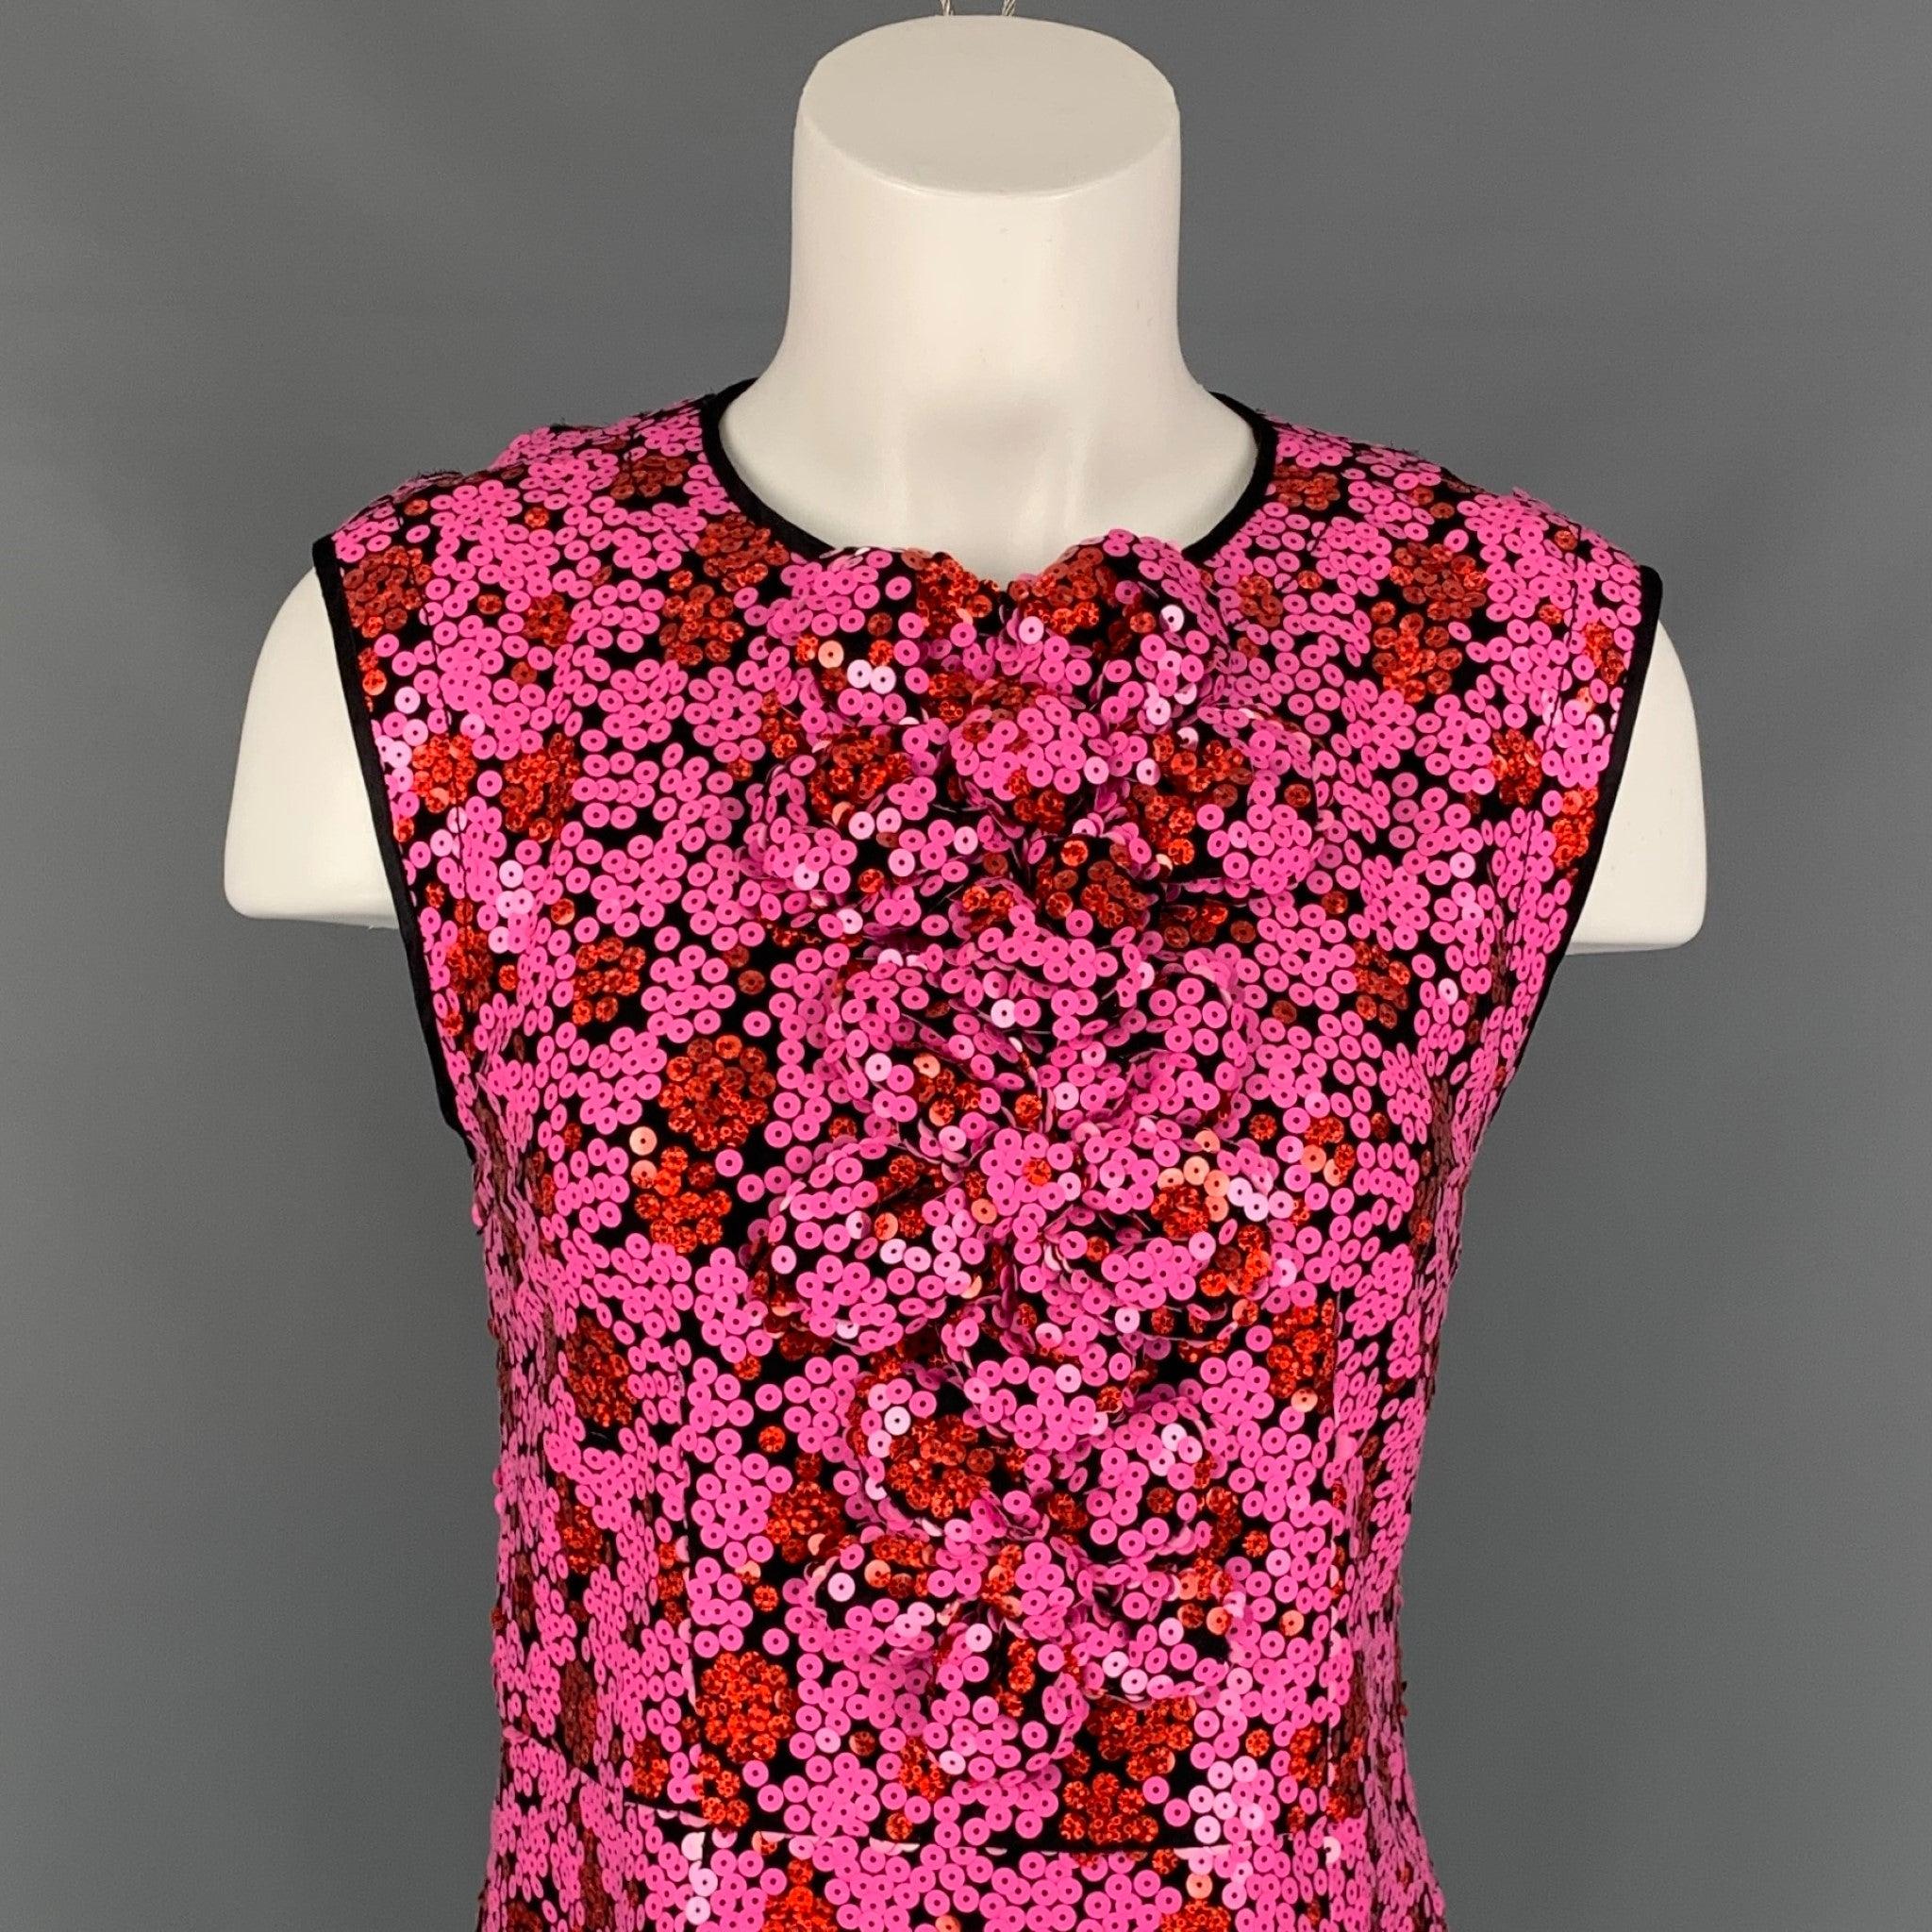 MARC JACOBS dress top comes in a pink & black sequined polyester blend featuring a floral design, sleeveless, and a back zip up closure. Made in USA.
Very Good
Pre-Owned Condition. 

Marked:   6 

Measurements: 
 
Shoulder: 16 inches  Bust: 36